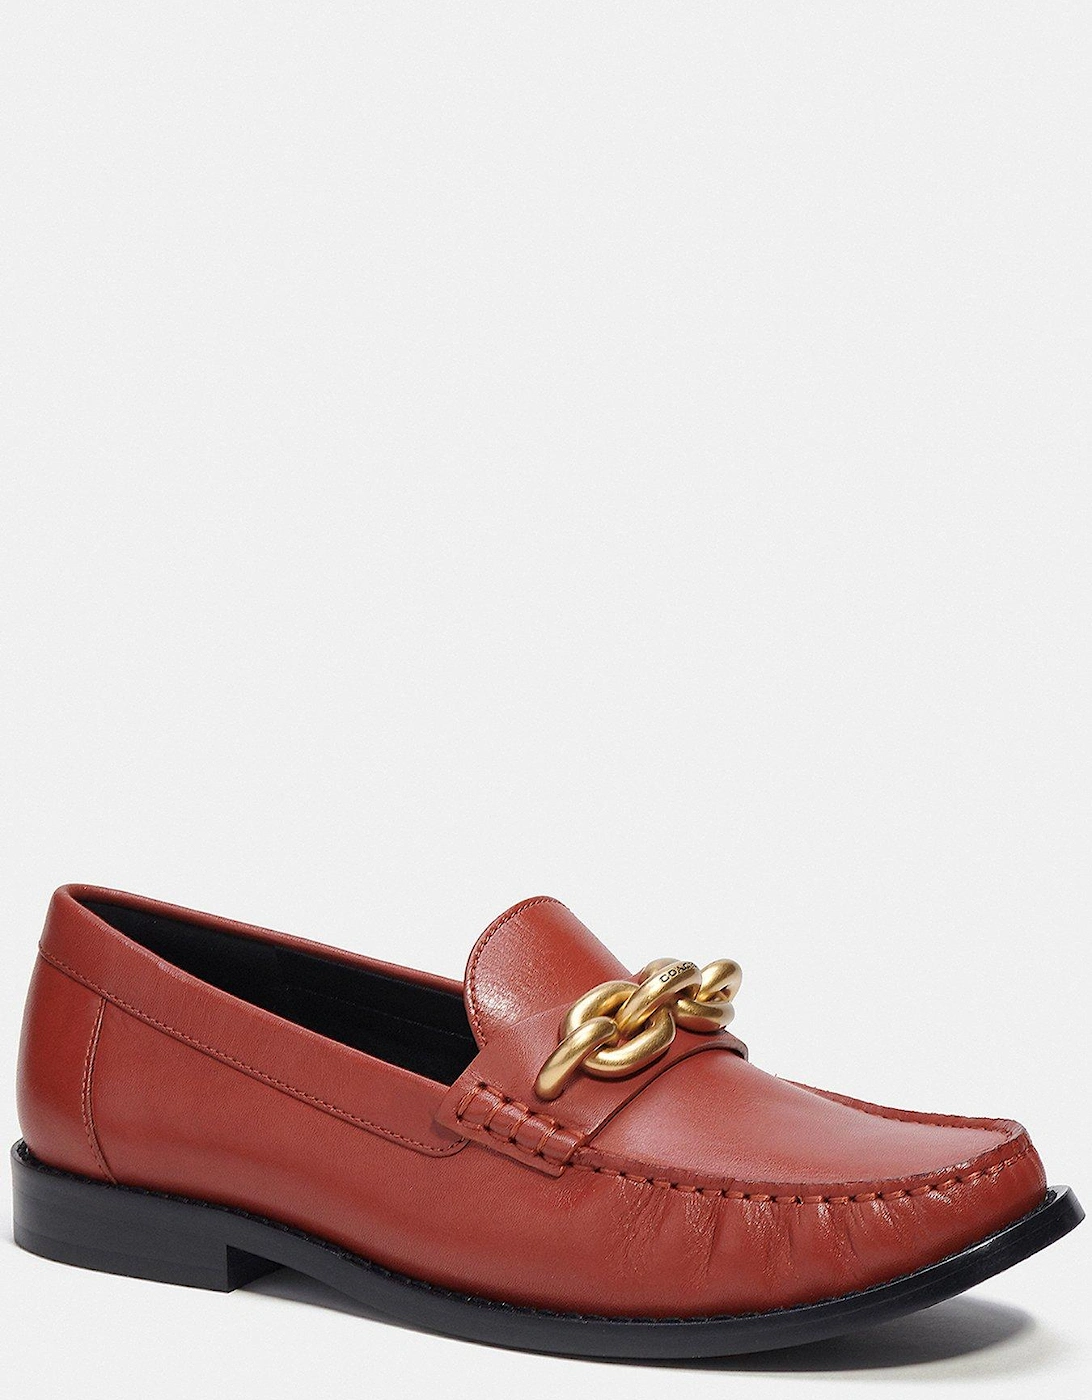 Jess Leather Loafer - Rust